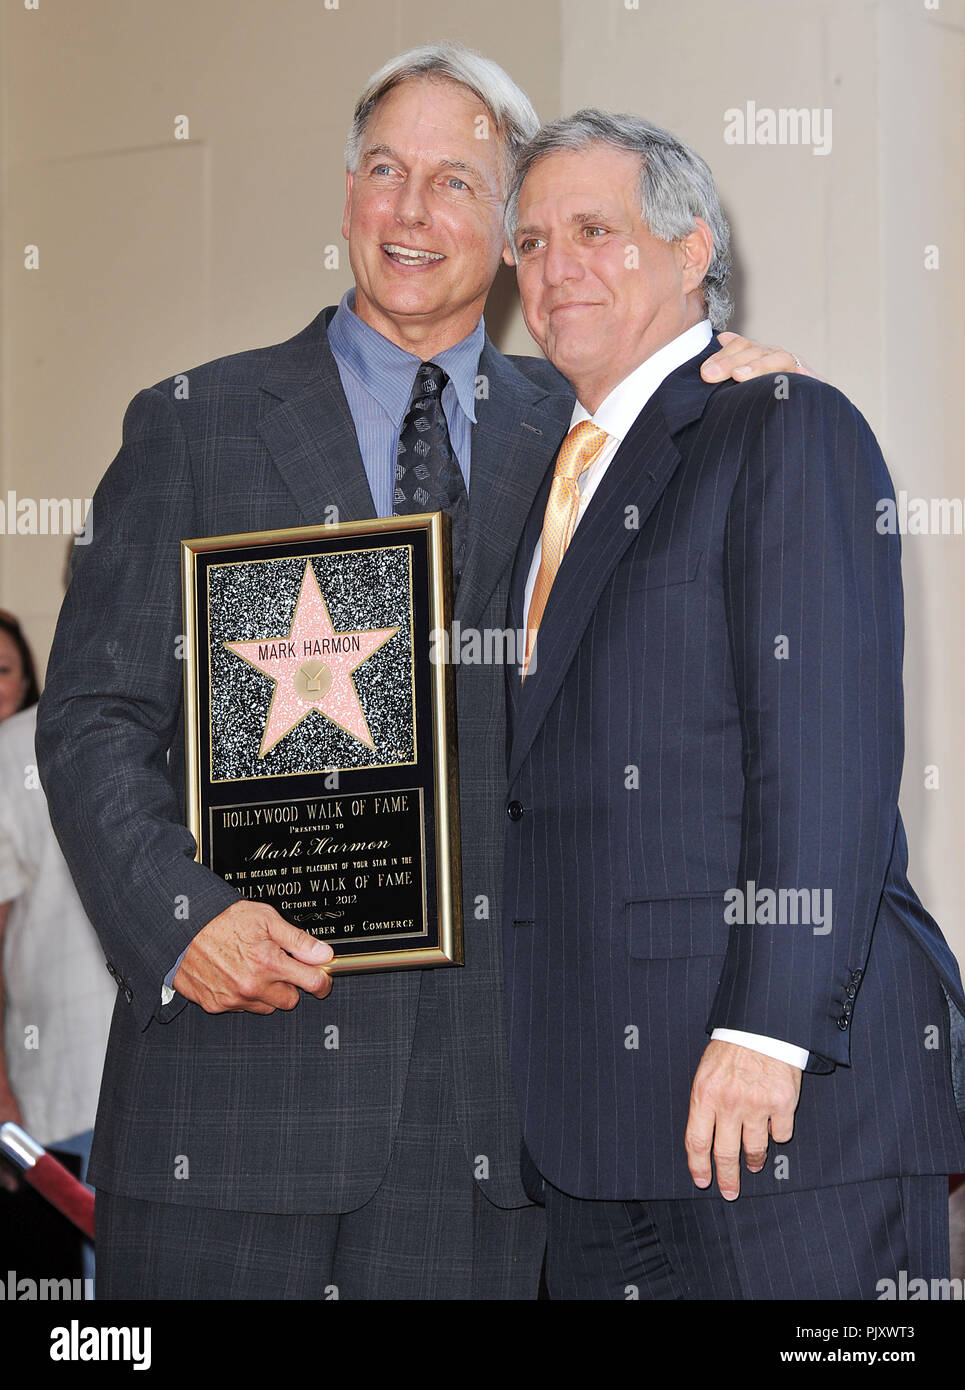 Mark Harmon ( NCIS ) onorato con una stella sulla Hollywood Walk of Fame a  Los Angeles.Mark Harmon - NCIS Star 17, Les Moonves Evento in Hollywood Lif  Foto stock - Alamy